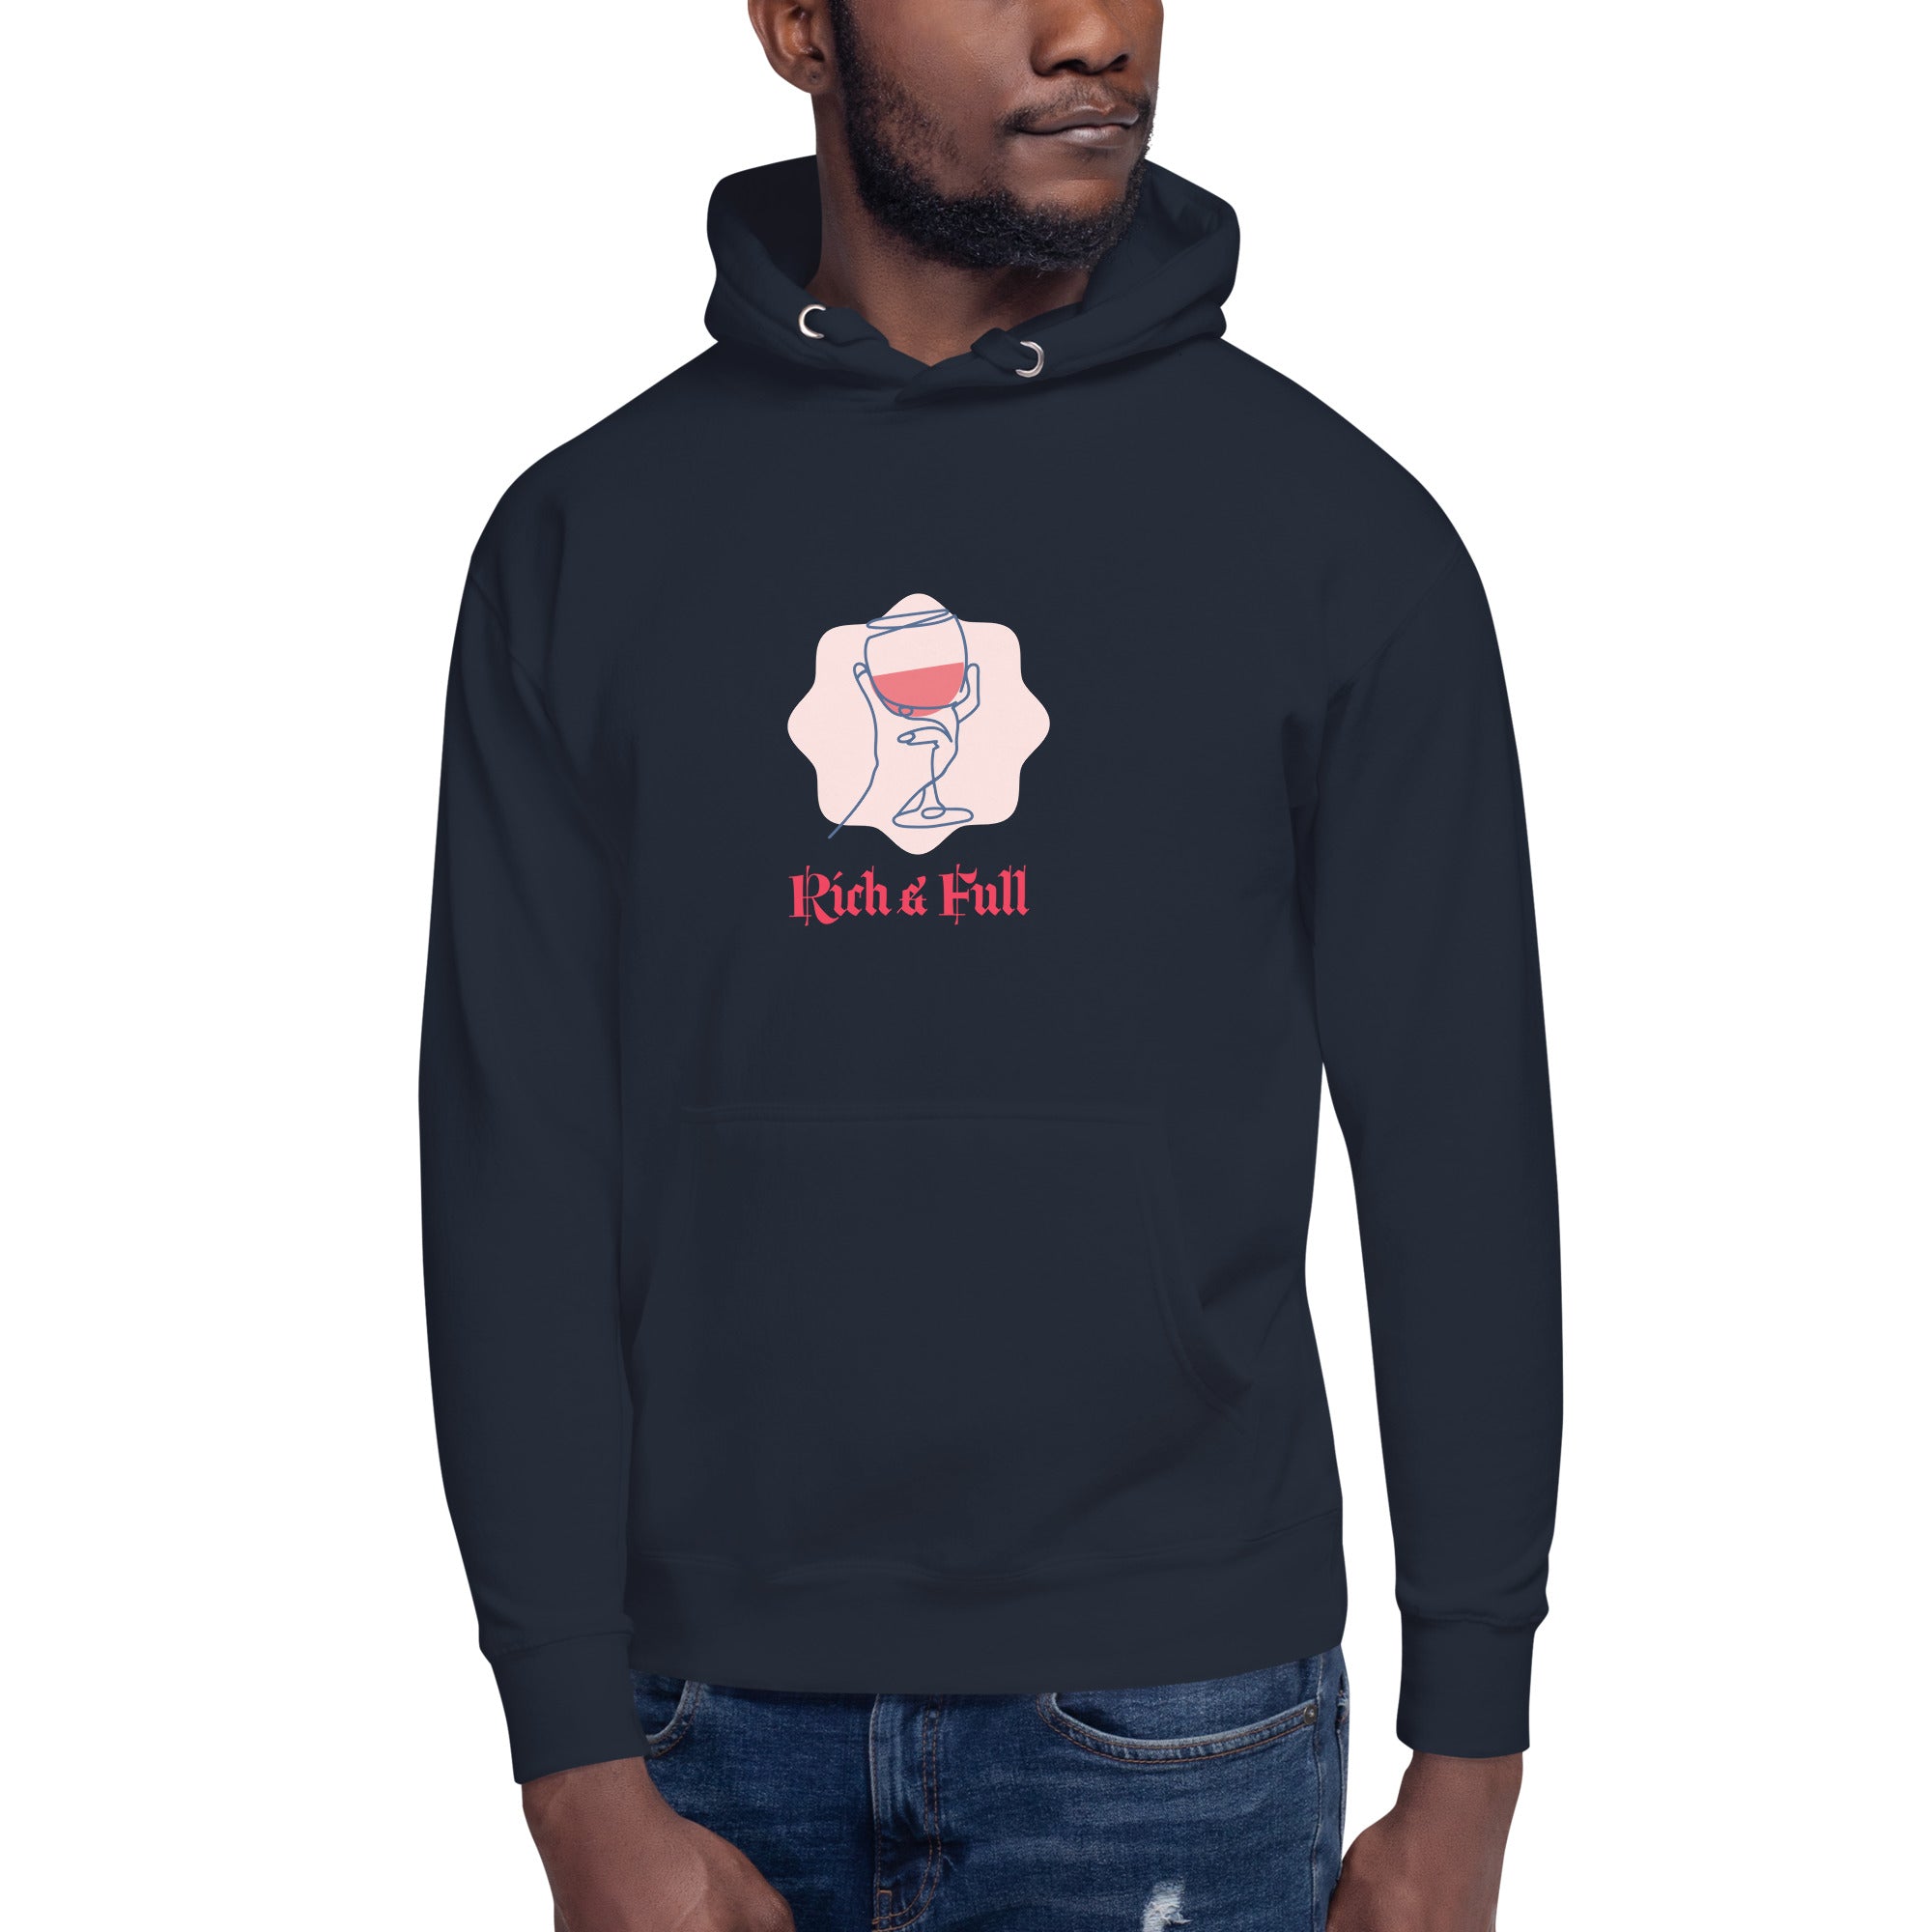 Your Life Rich And Full, Premium Unisex Hoodie | Positive Affirmation Clothing